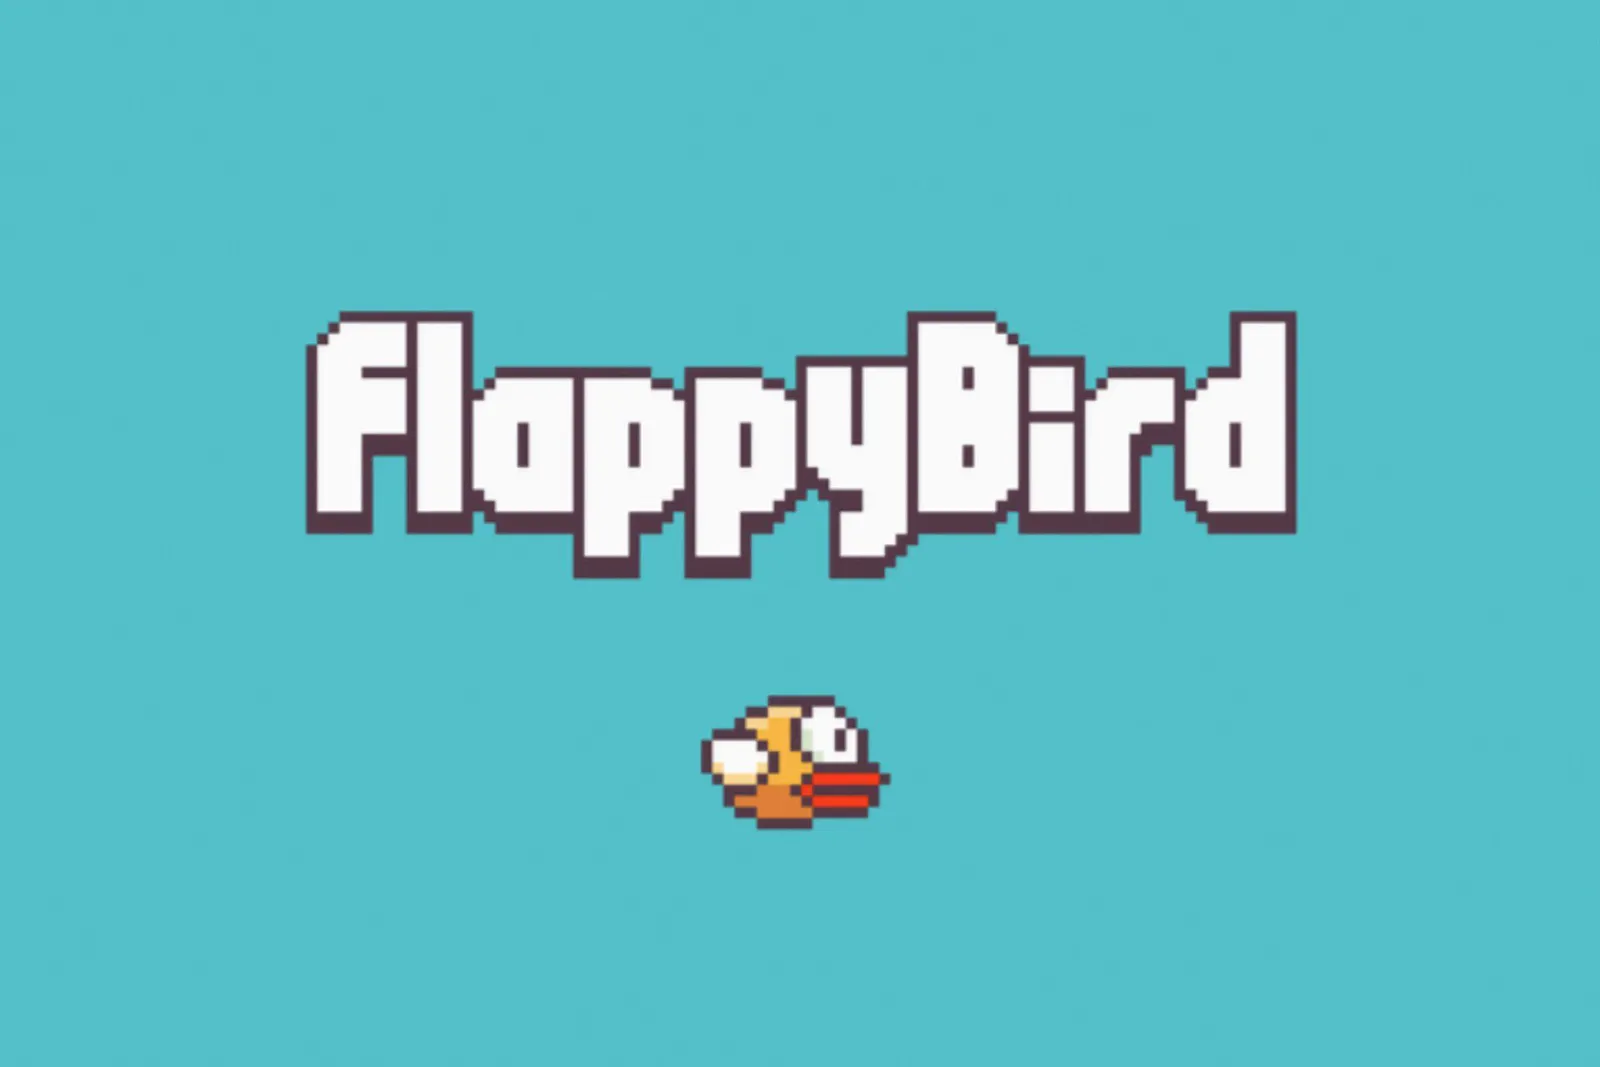 Flappy Bird Online - Play Unblocked & Free. No Downloads!